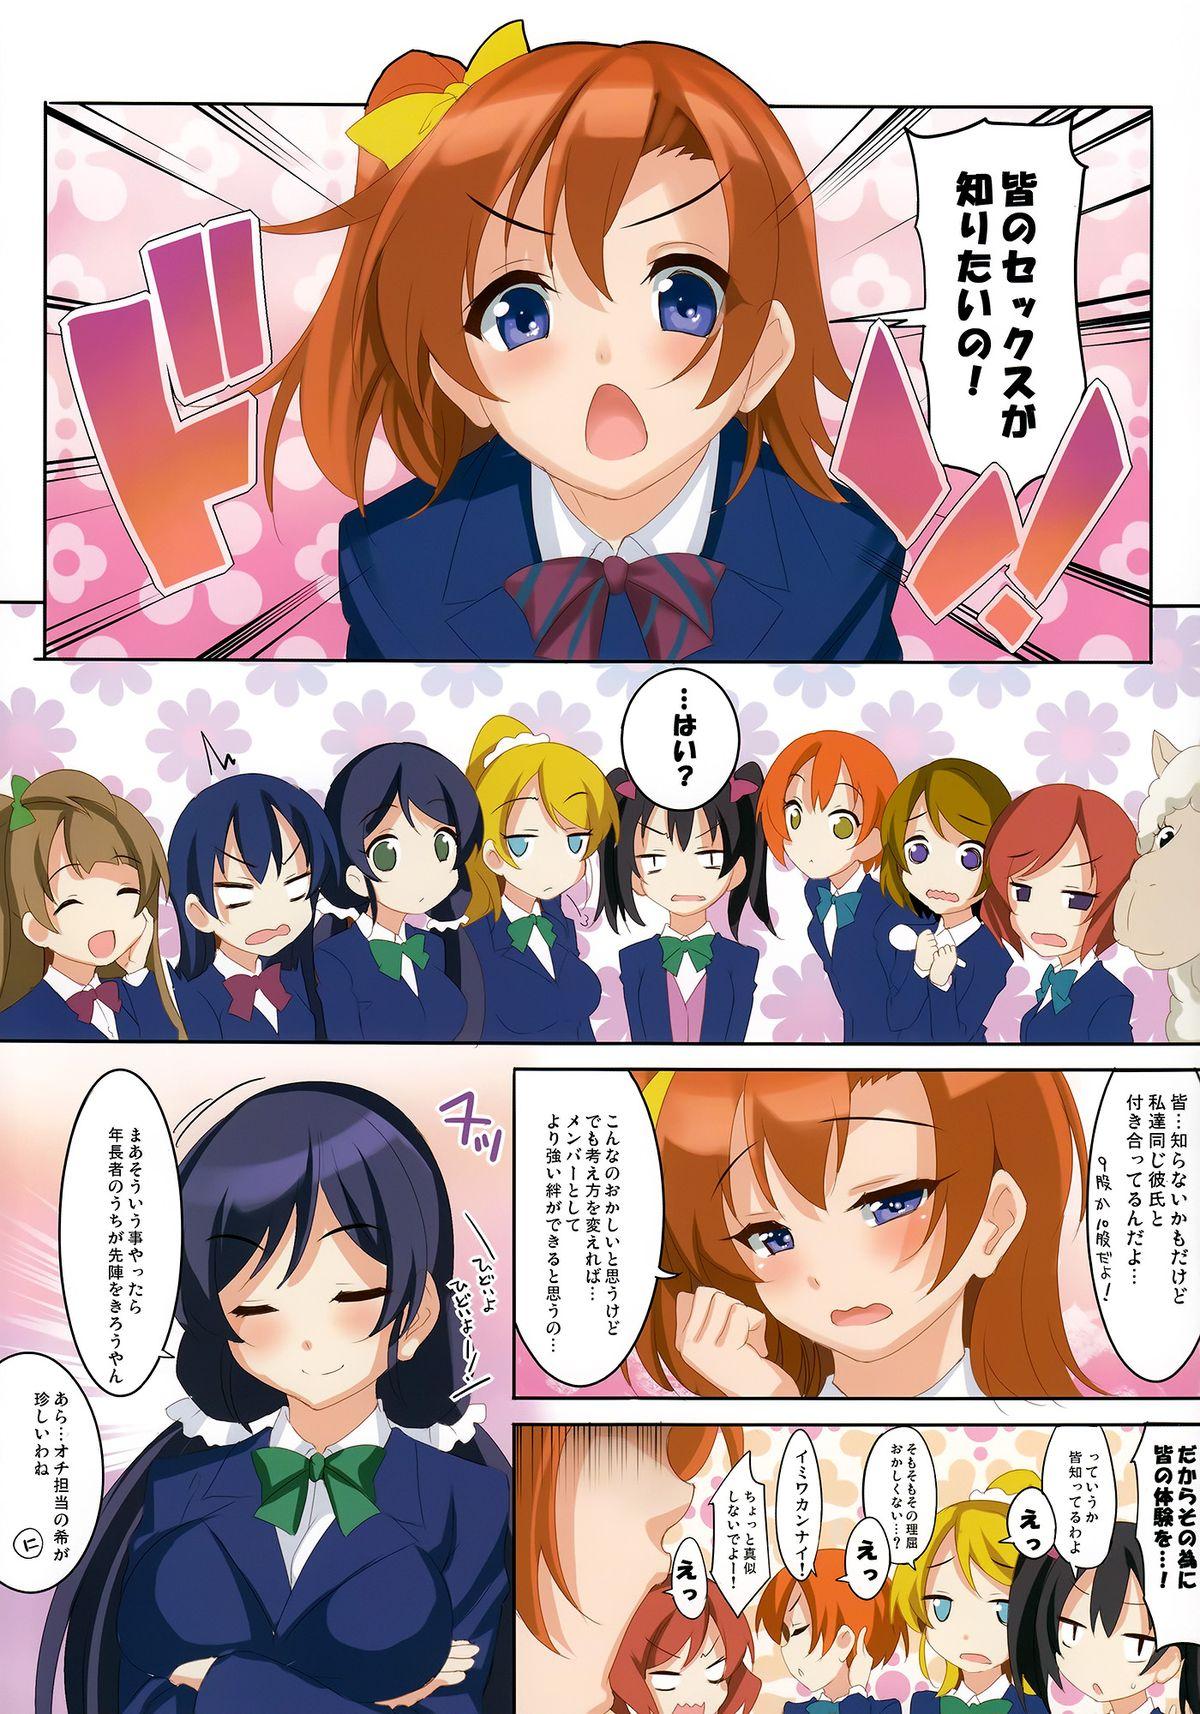 Doctor Sex CL-orz 41 - Love live Ex Girlfriends - Page 3